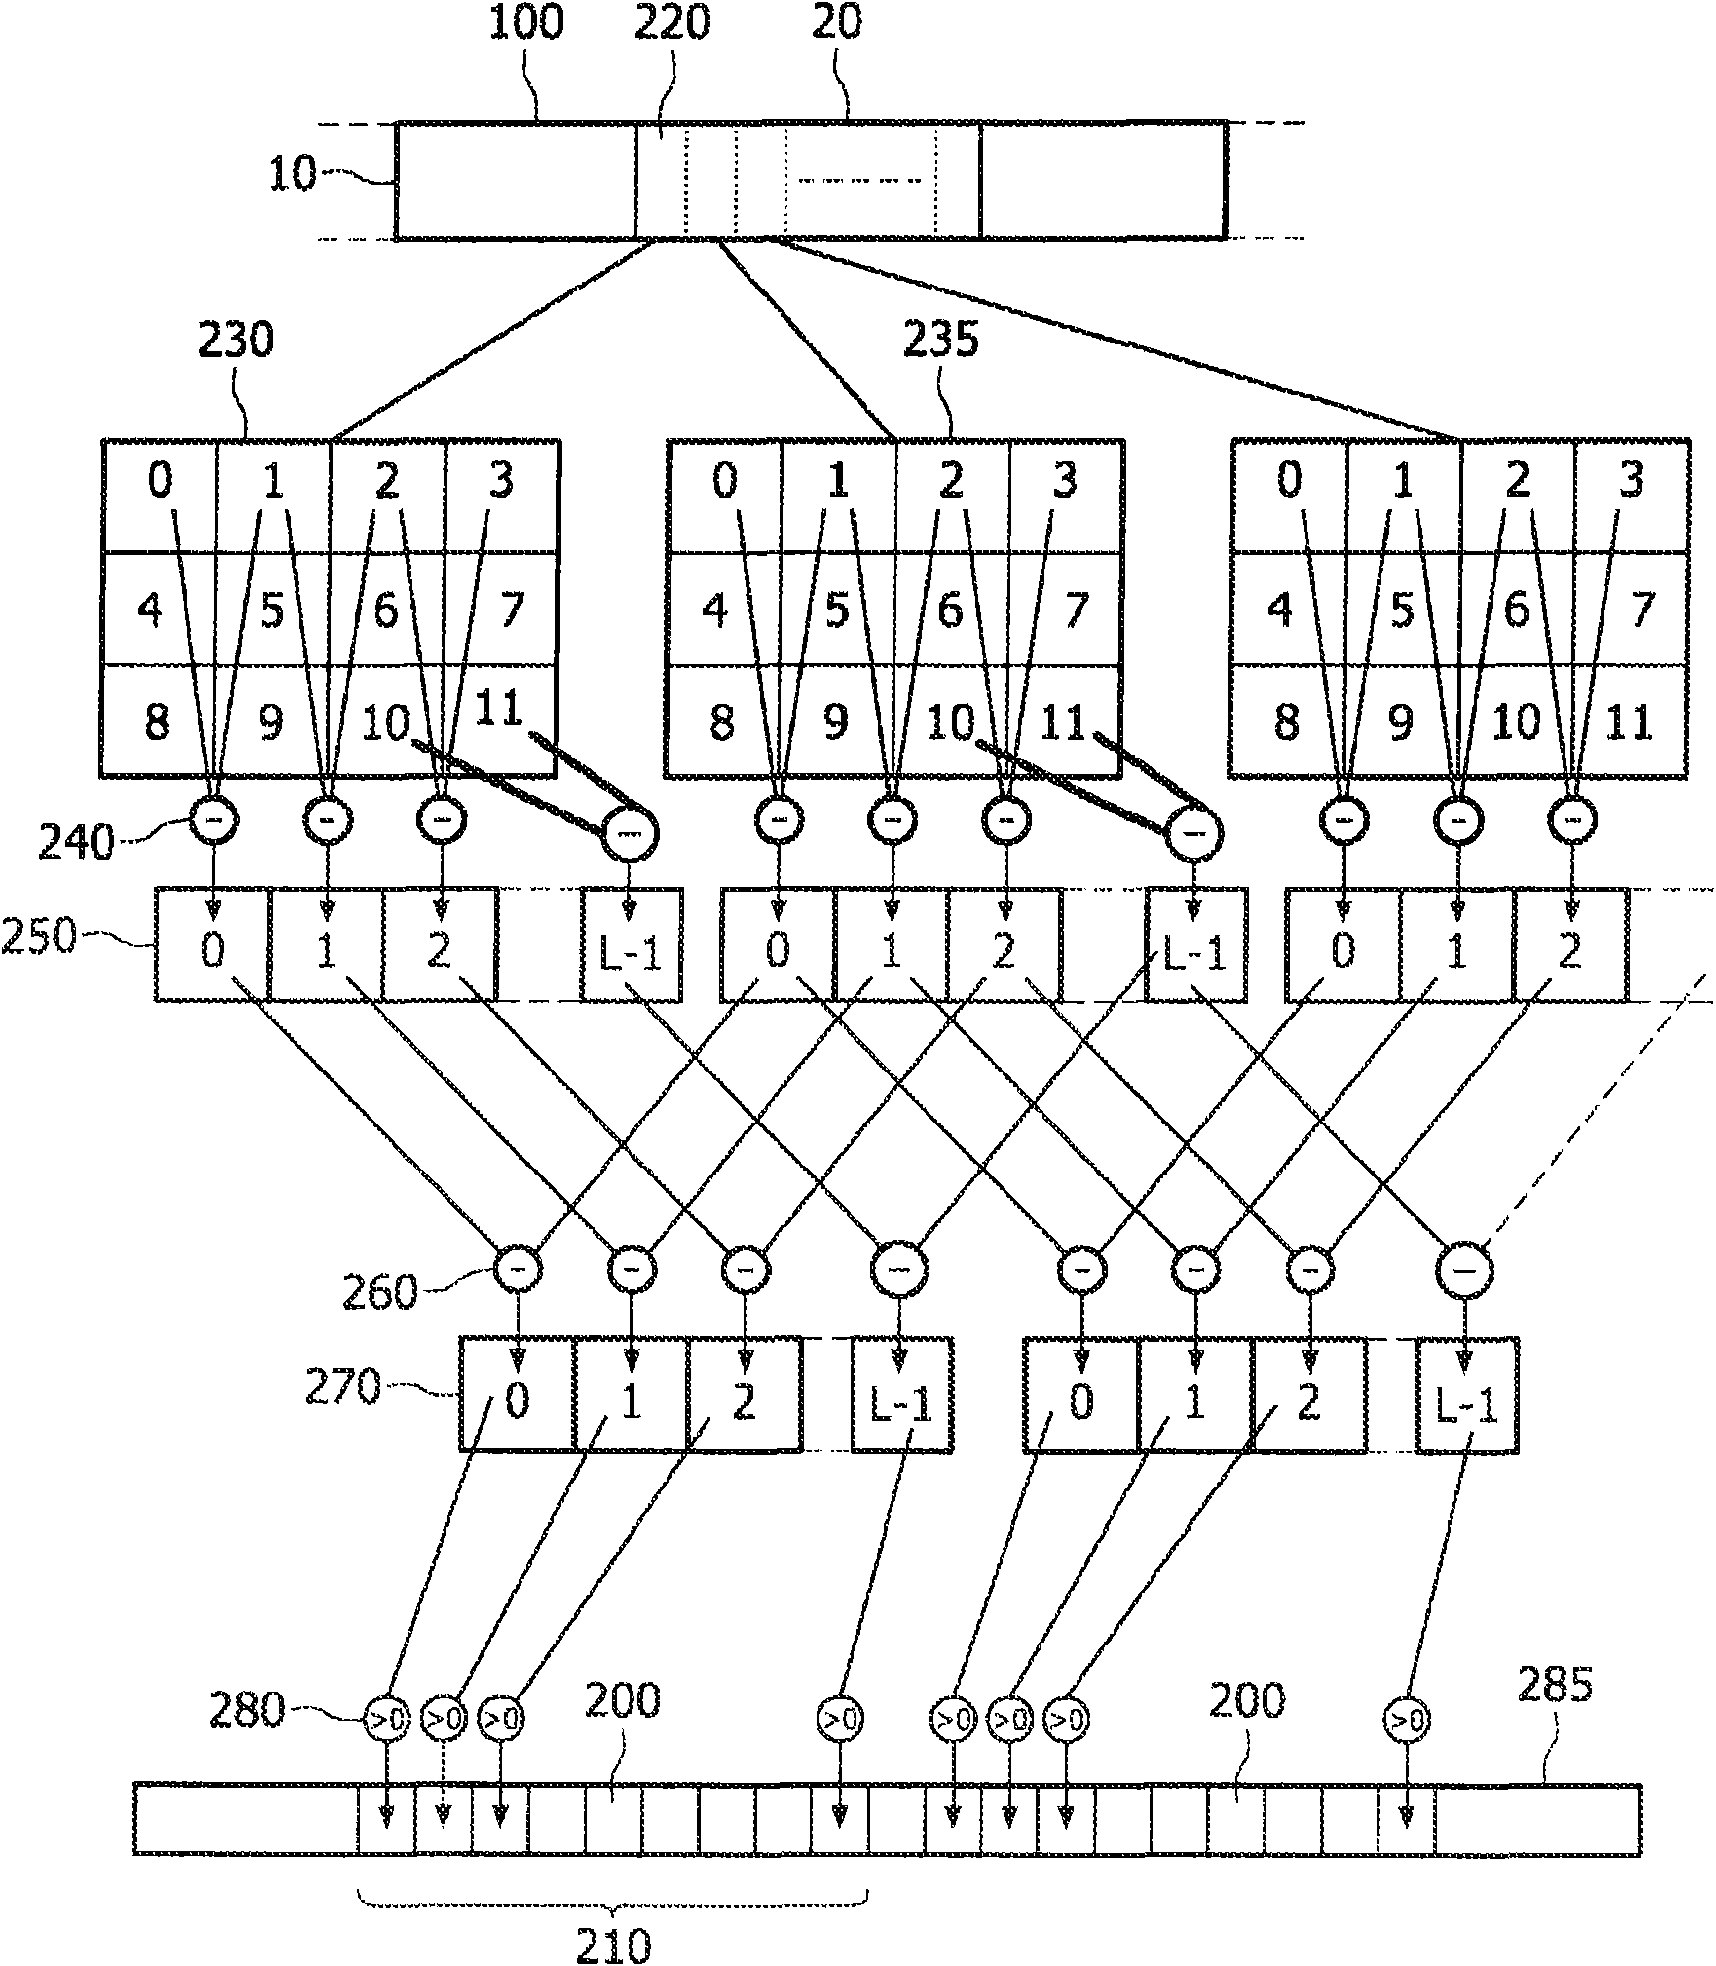 A method for synchronizing a content stream and a script for outputting one or more sensory effects in a multimedia system